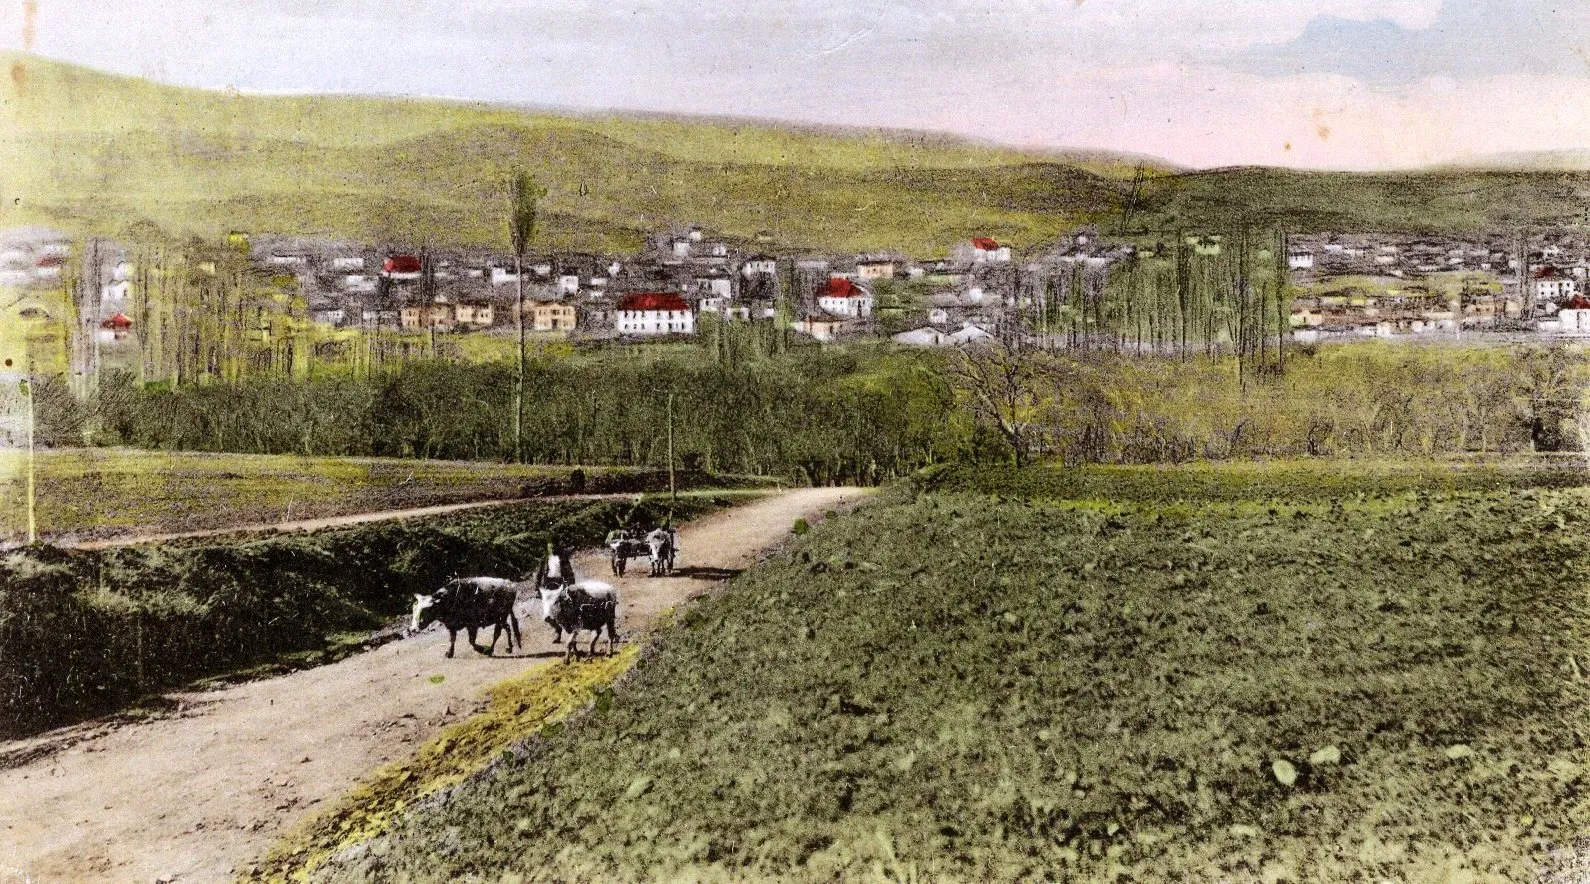 Photo showing: Village Carevo Selo, Makedonija, nowdays Delchevo, photo 1920's

This media file is produced by Wikipedian in Residence in Category:Wikipedian in Residence at DARM in 2016.